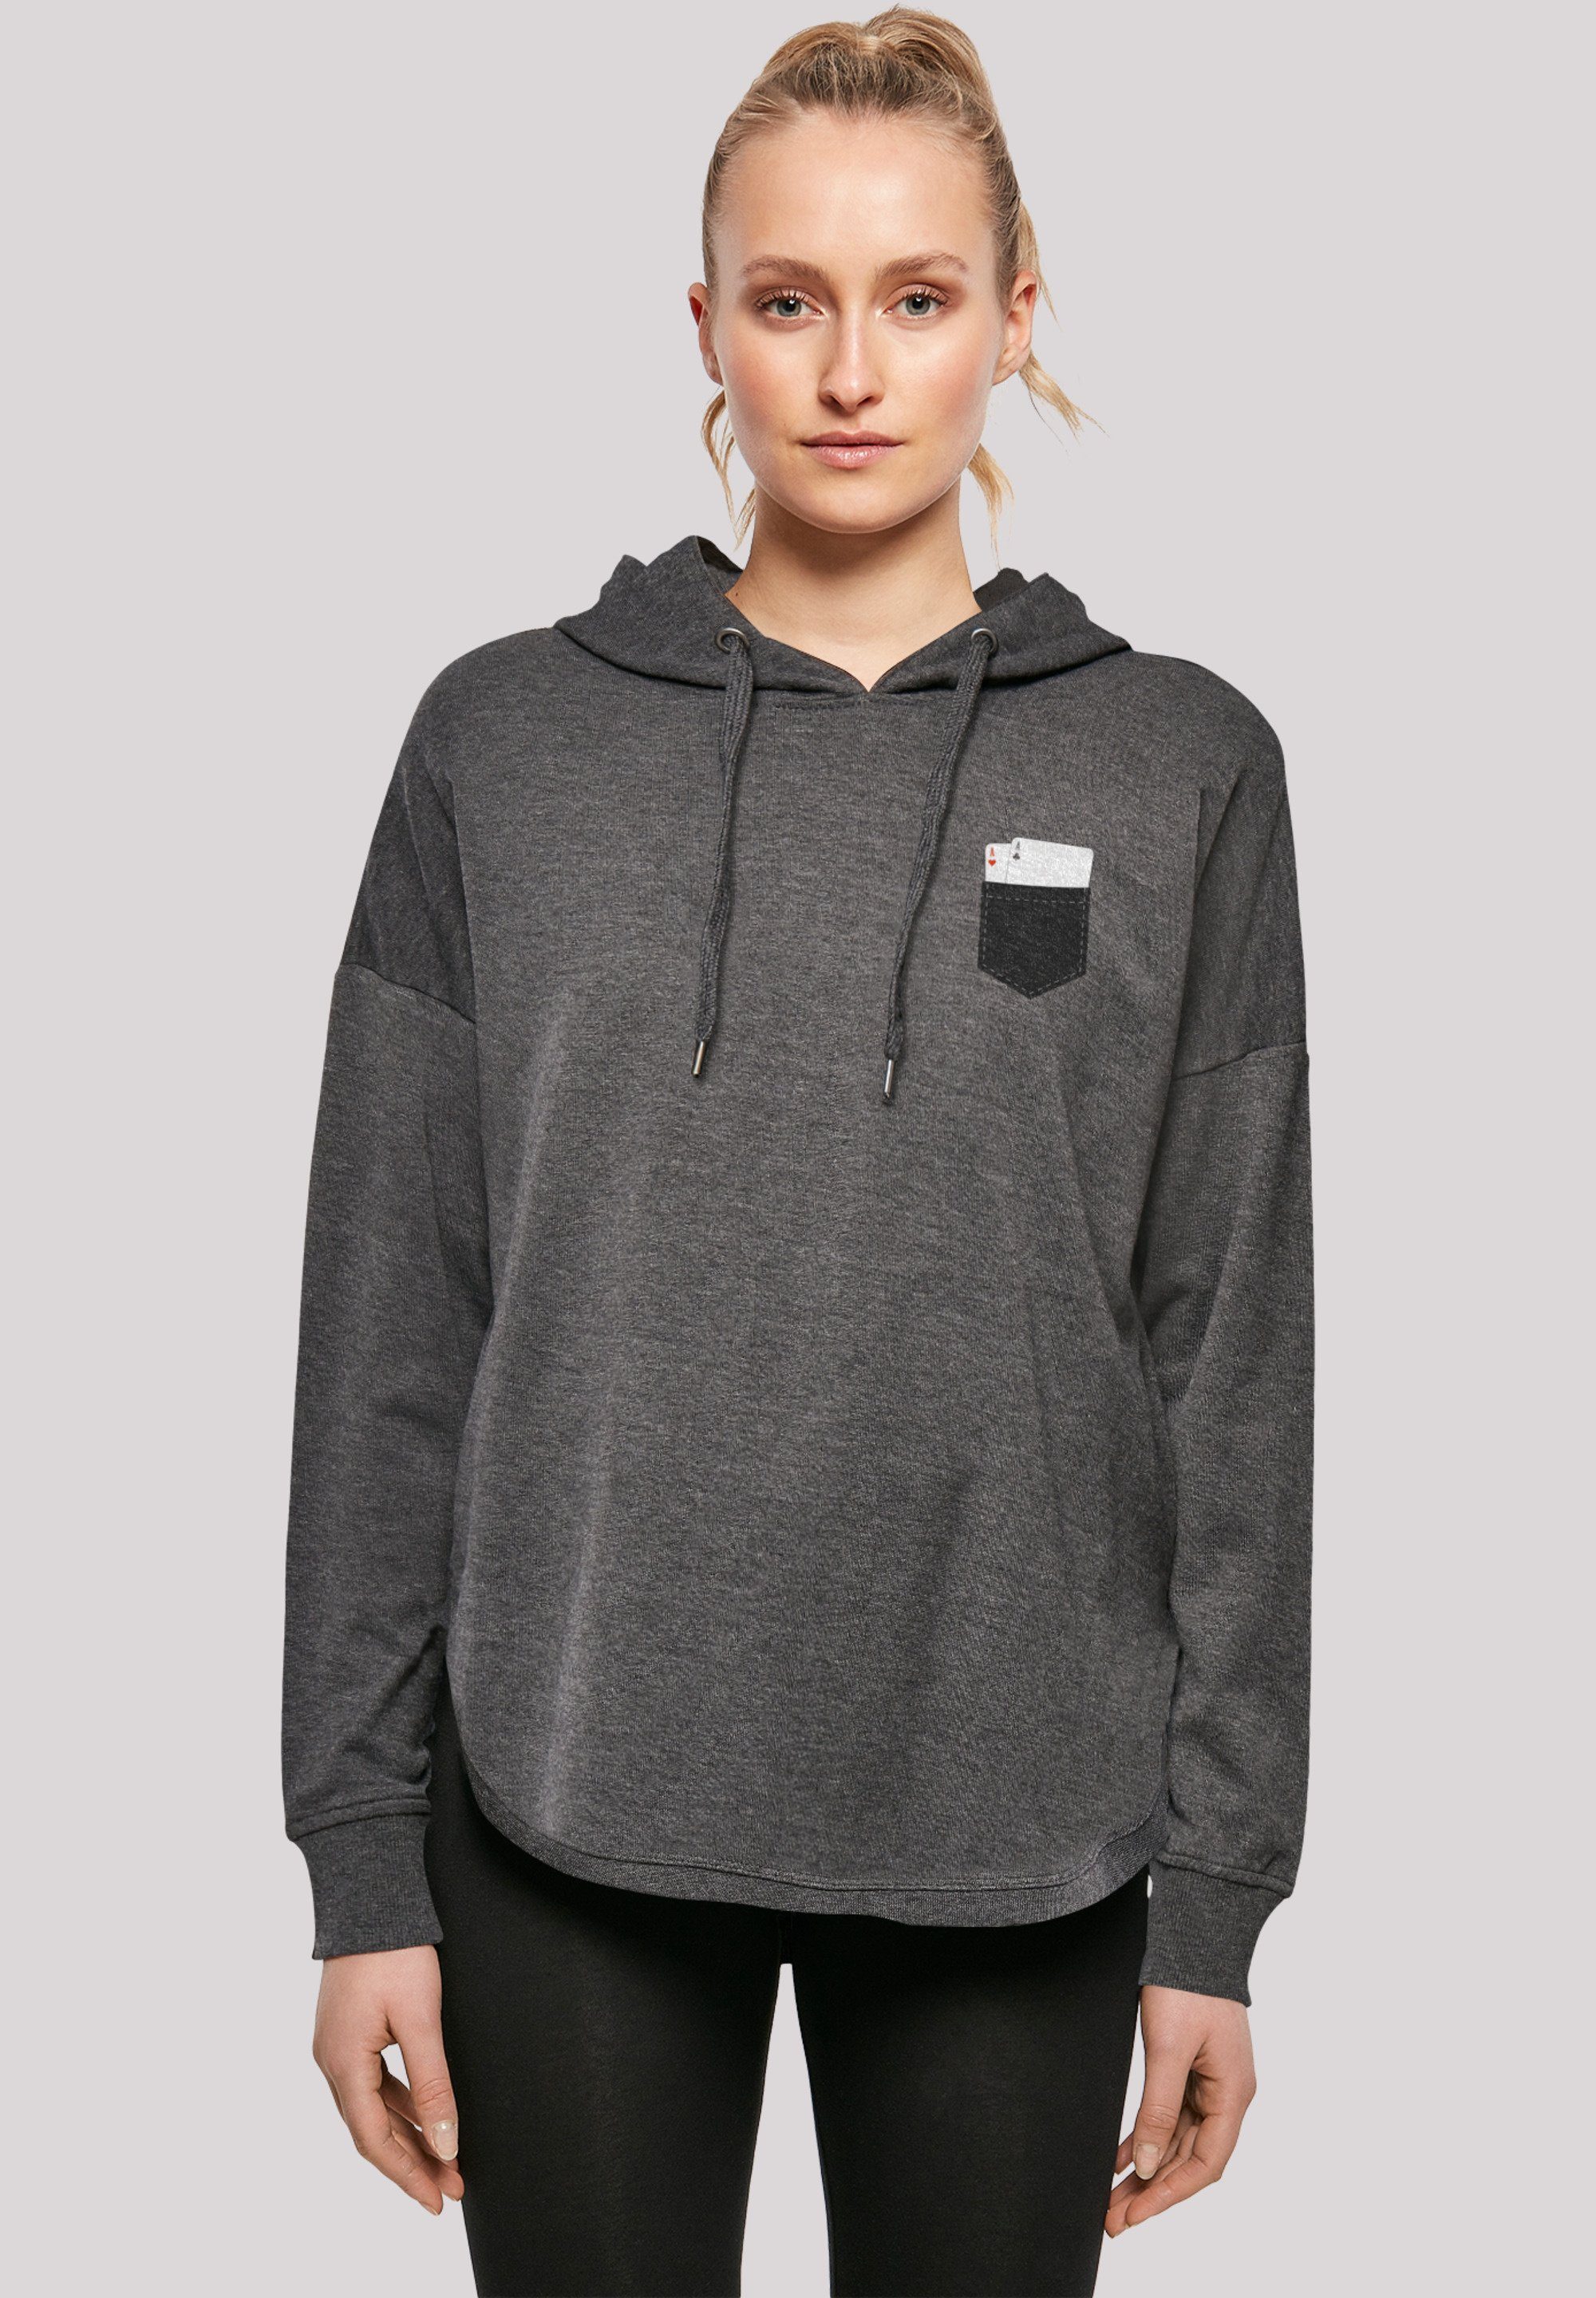 F4NT4STIC Kapuzenpullover Pocket with charcoal Cards Print